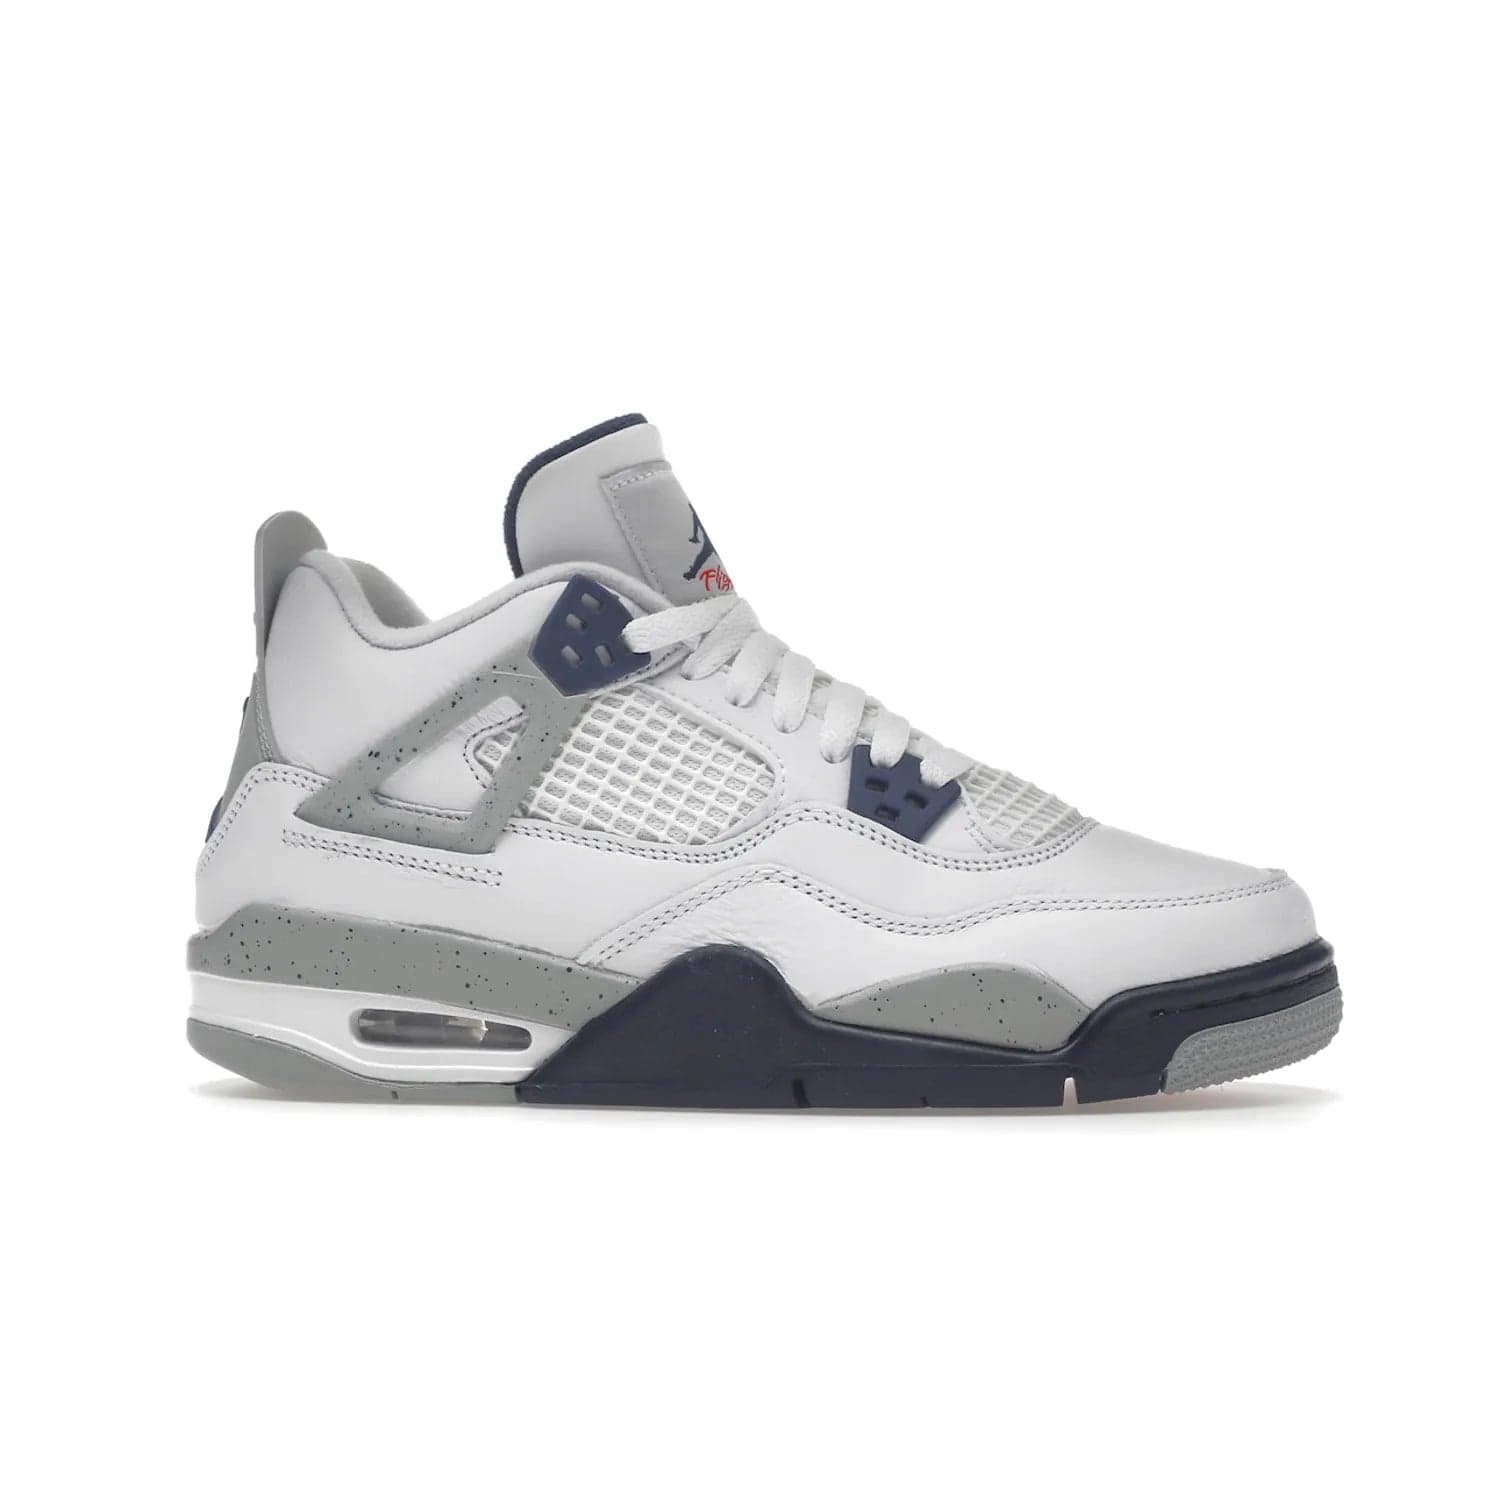 Jordan 4 Retro Midnight Navy (GS) - Image 2 - Only at www.BallersClubKickz.com - Shop the Air Jordan 4 Retro Midnight Navy GS. The white leather upper features black support wings & heel tab, navy eyelets & woven tongue tag with Jumpman logos. The midsole features two-tone polyurethane insole & AIR units in the heel & forefoot. Get the white/midnight navy/light smoke grey/fire colorway & show off your style.